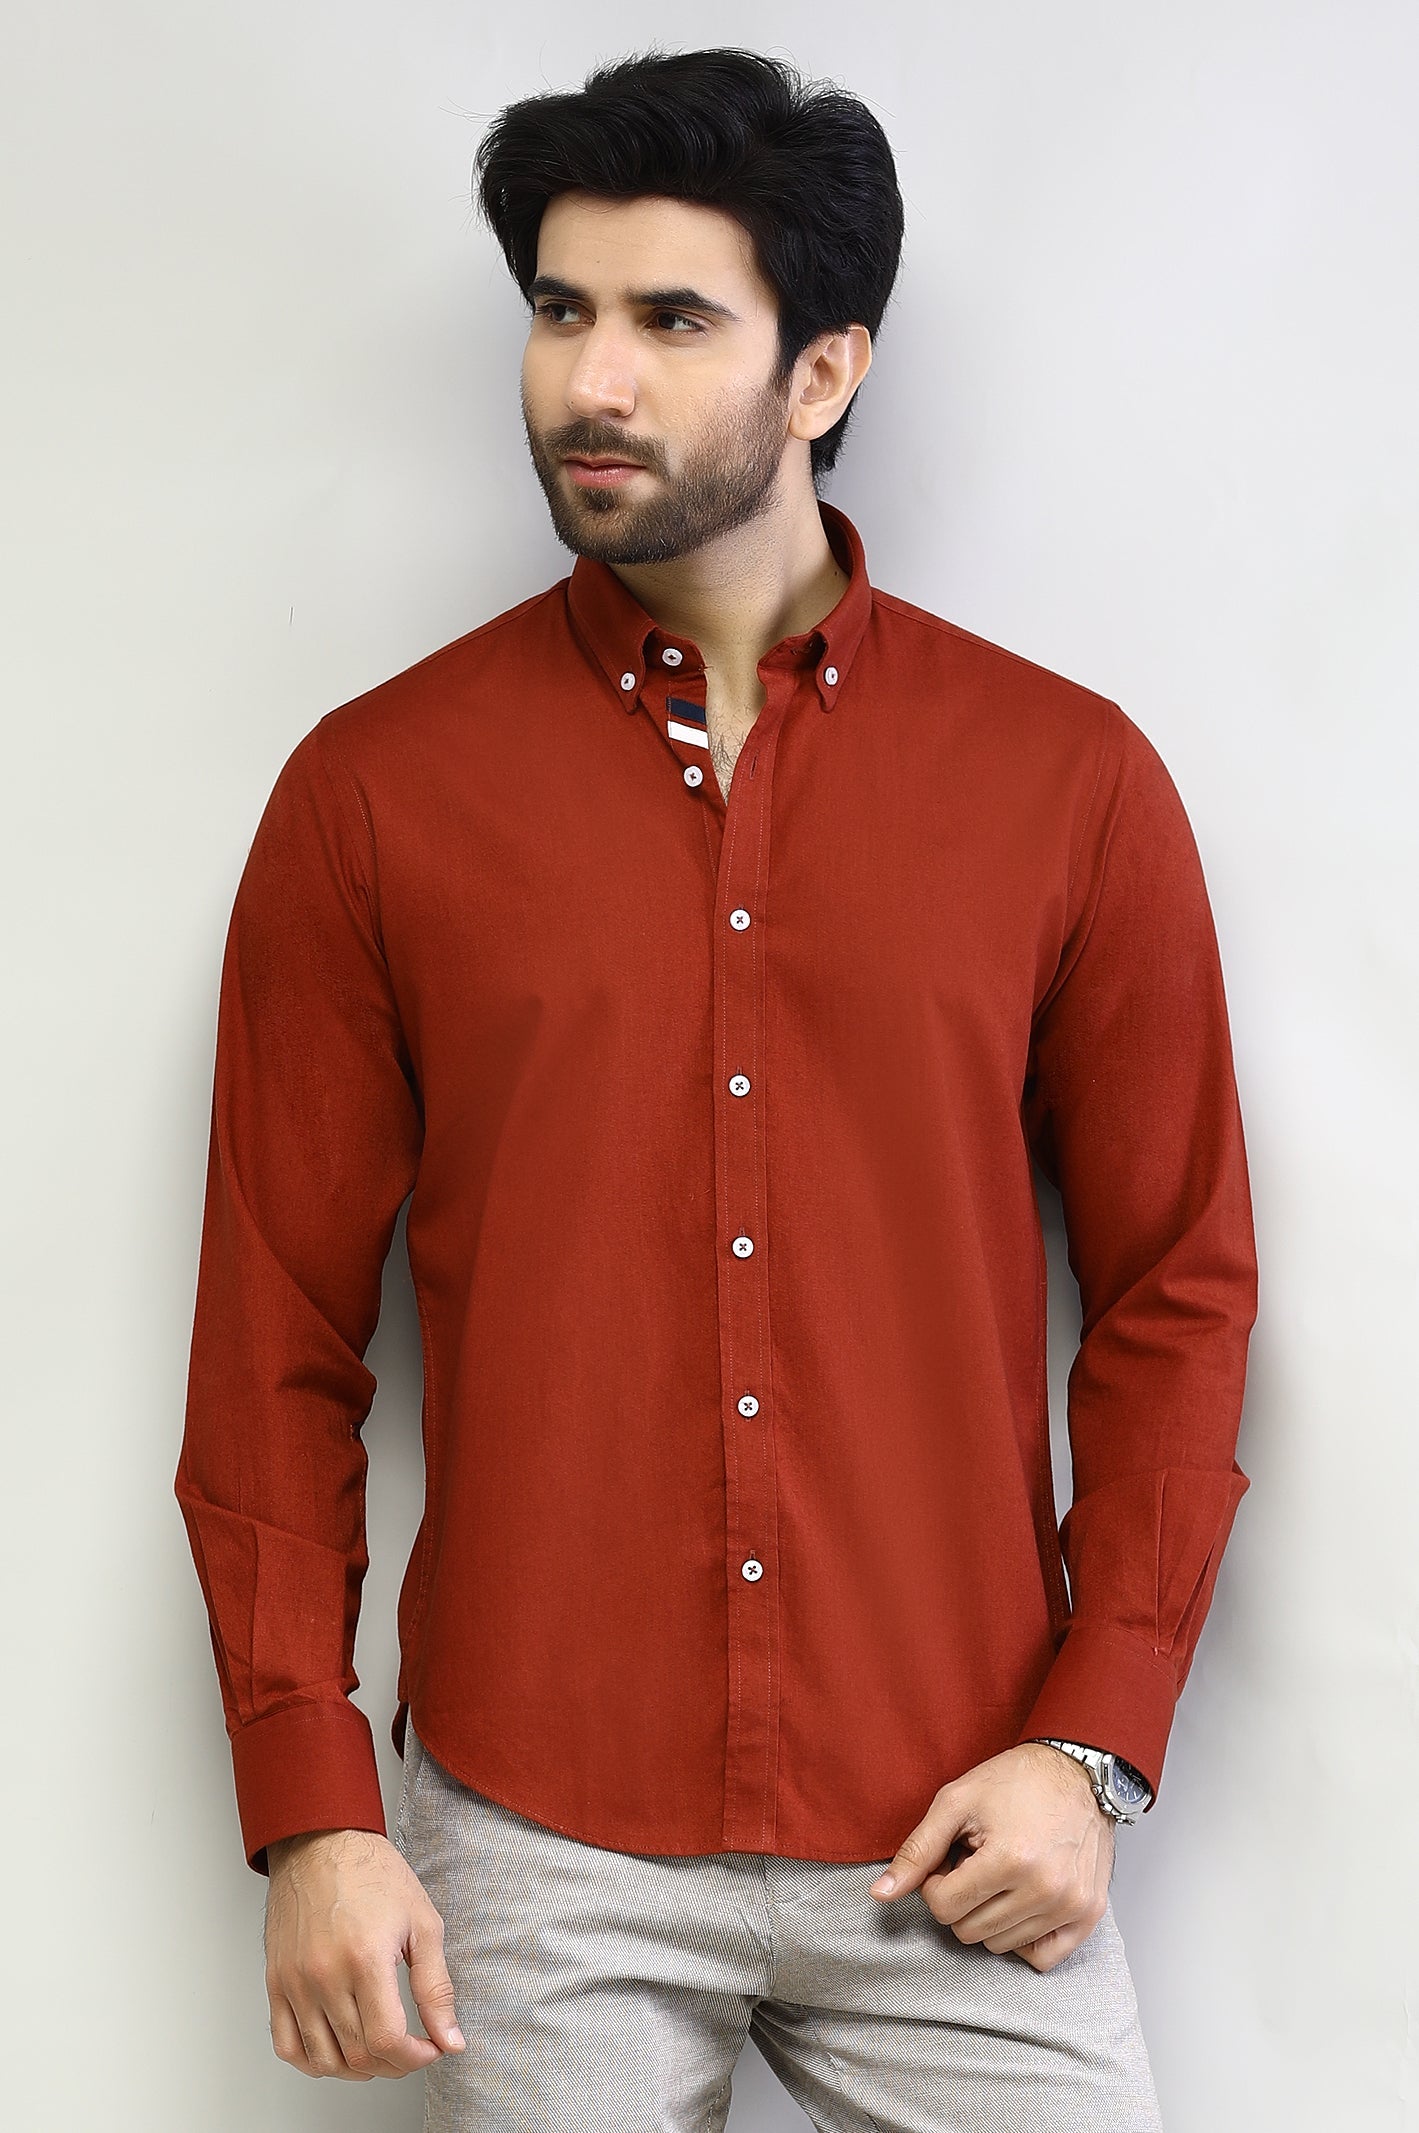 Rust Plain Casual Shirt for Men - Diners